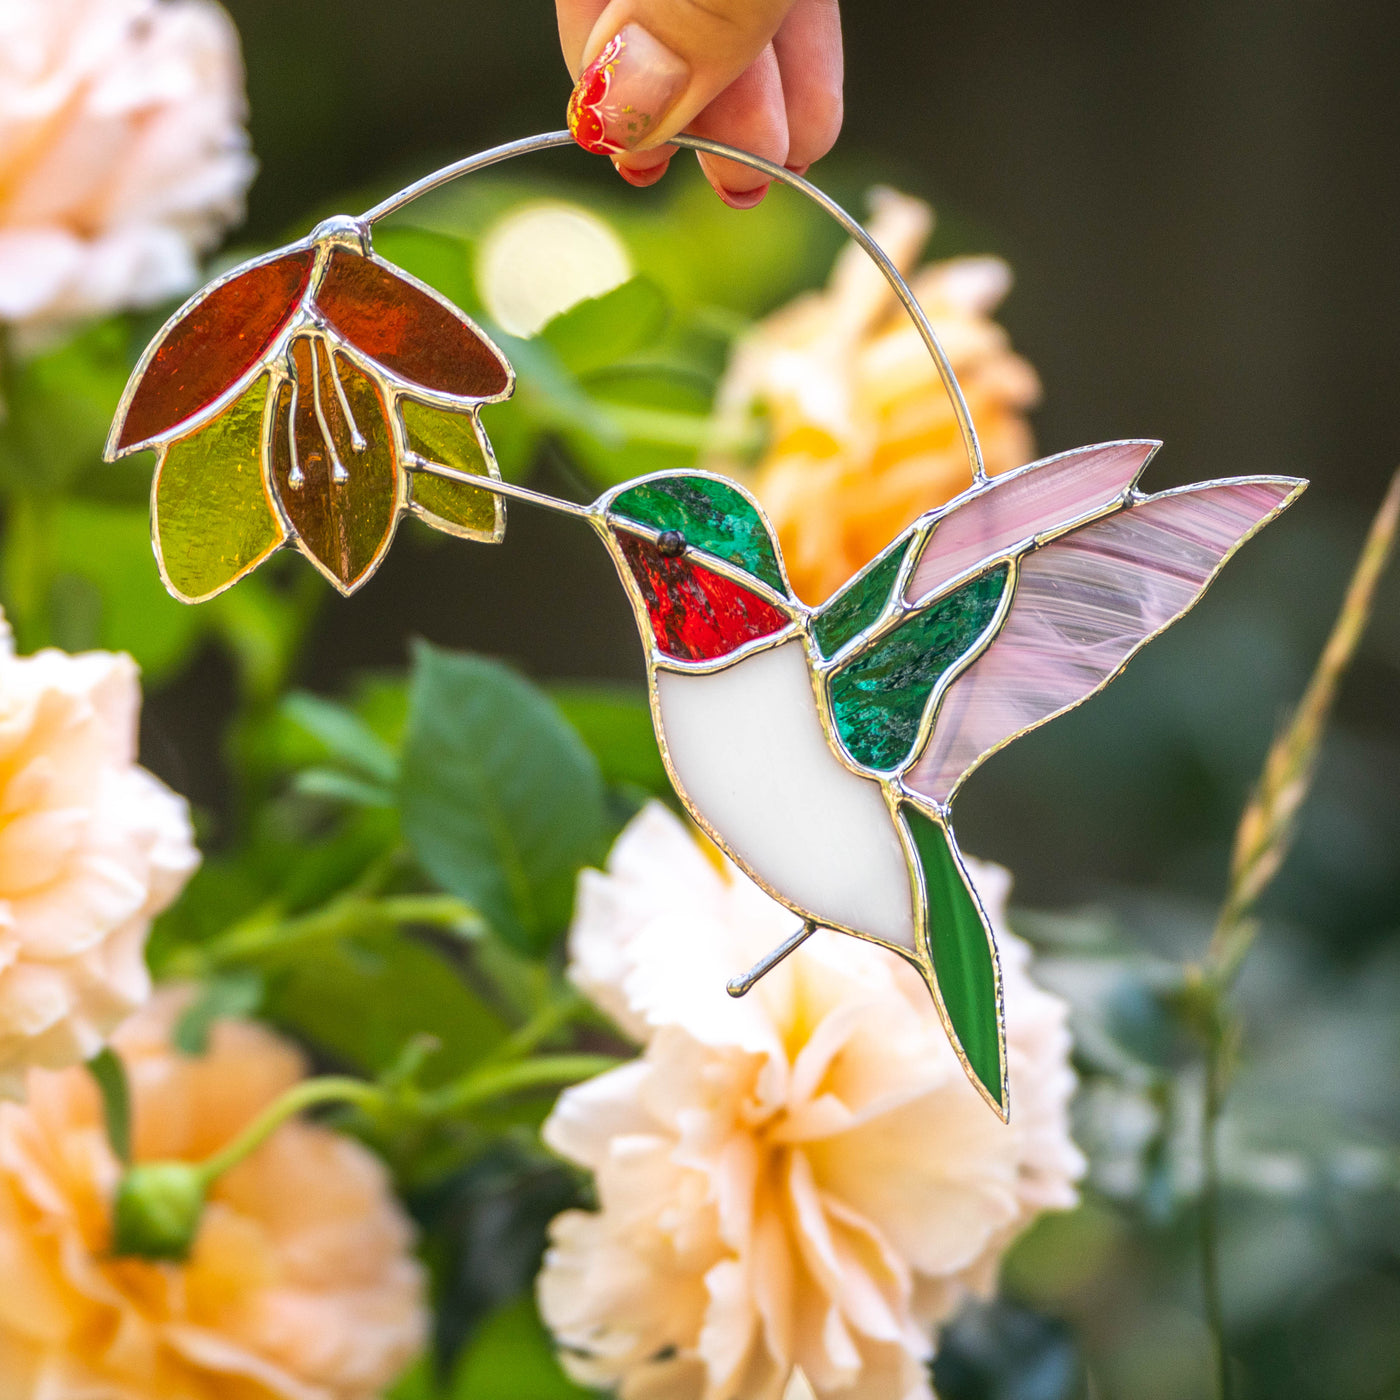 Hummingbird with white belly with red-yellow flower suncatcher of stained glass